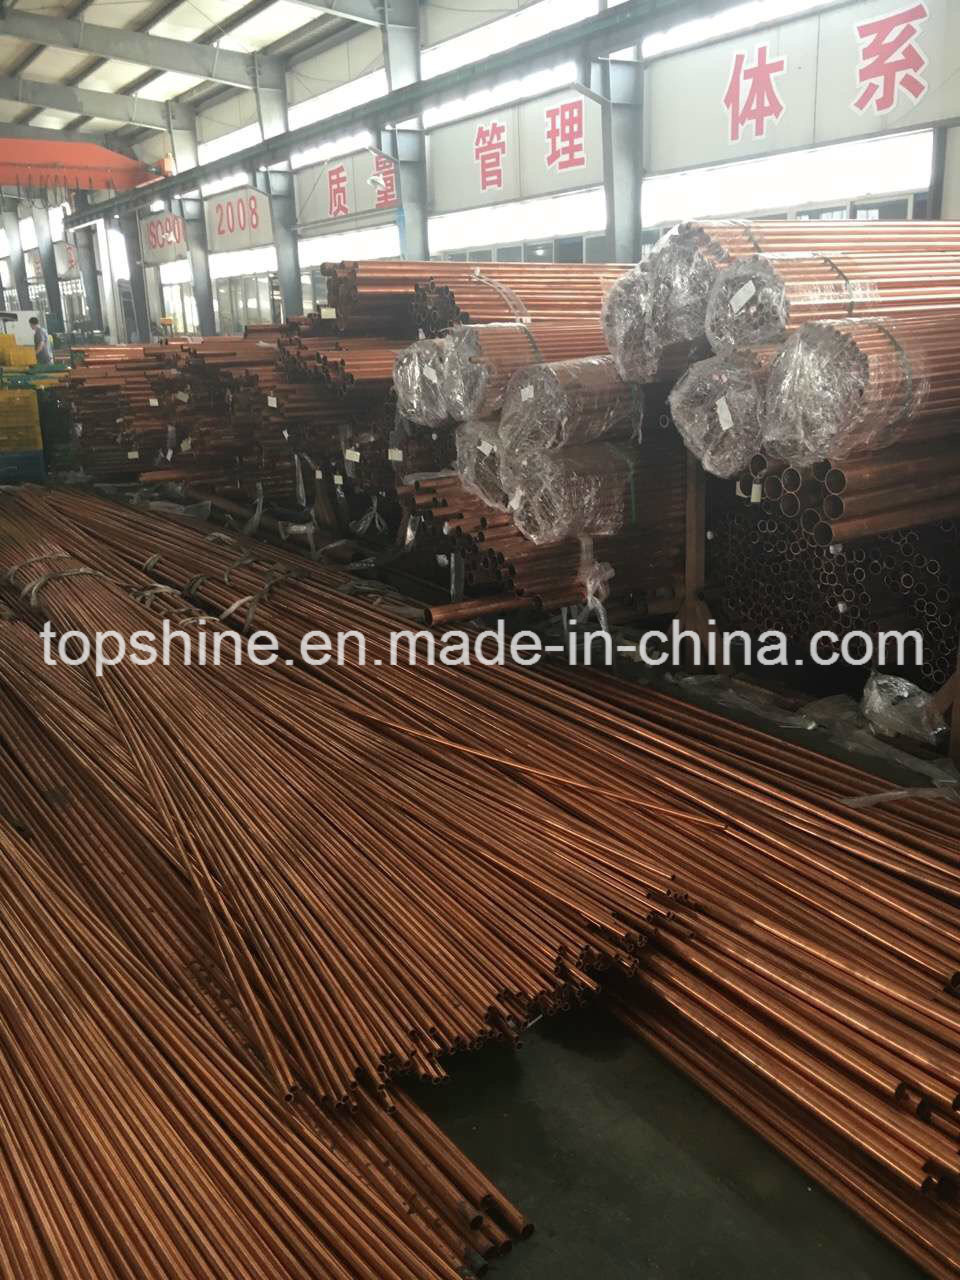 High Quality Air Condition Pressure Copper Fitting